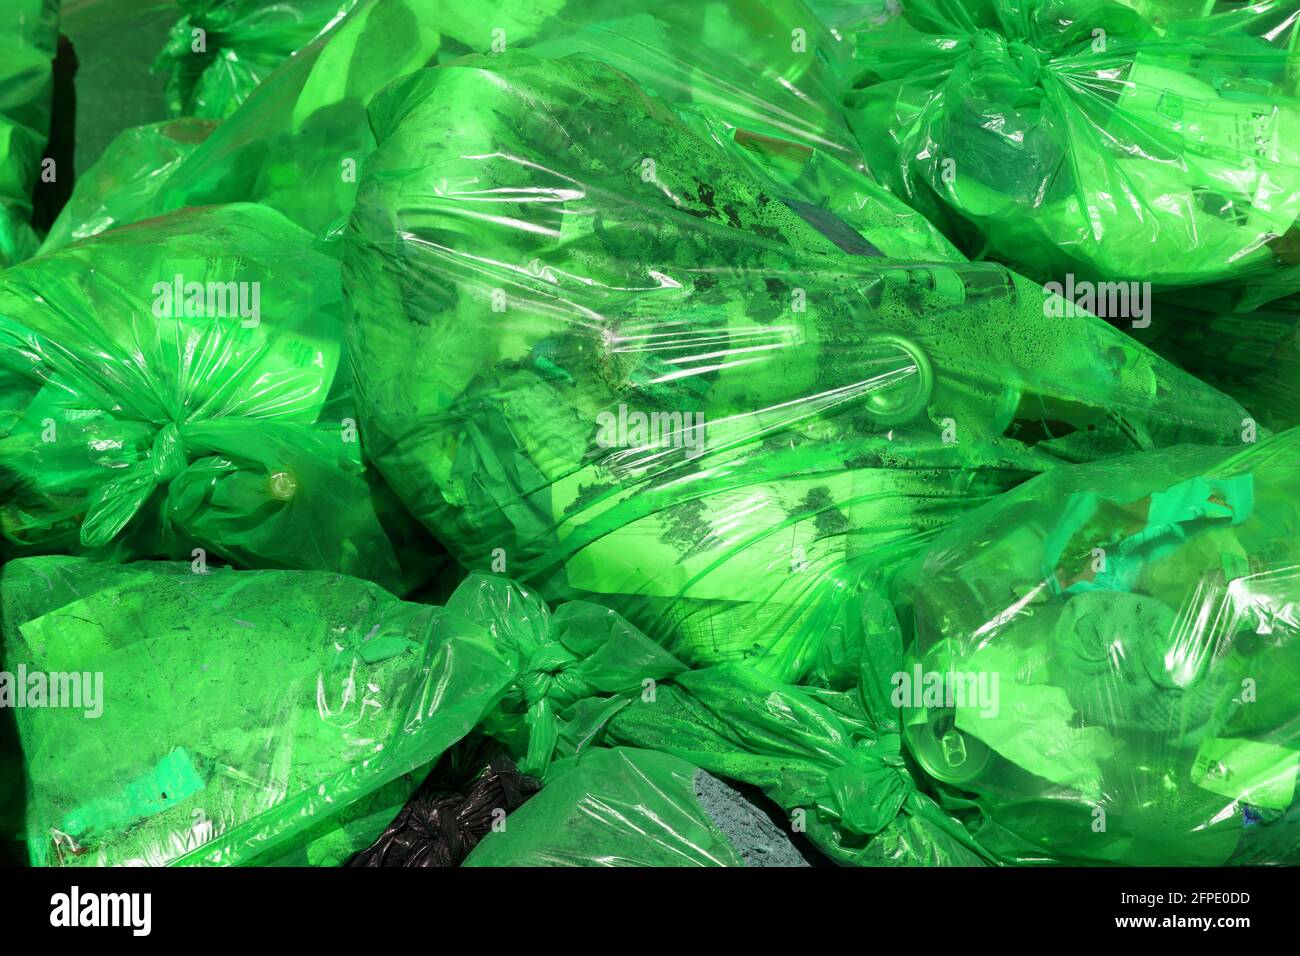 Stack of green garbage bags Stock Photo by ©thodonal 81961796